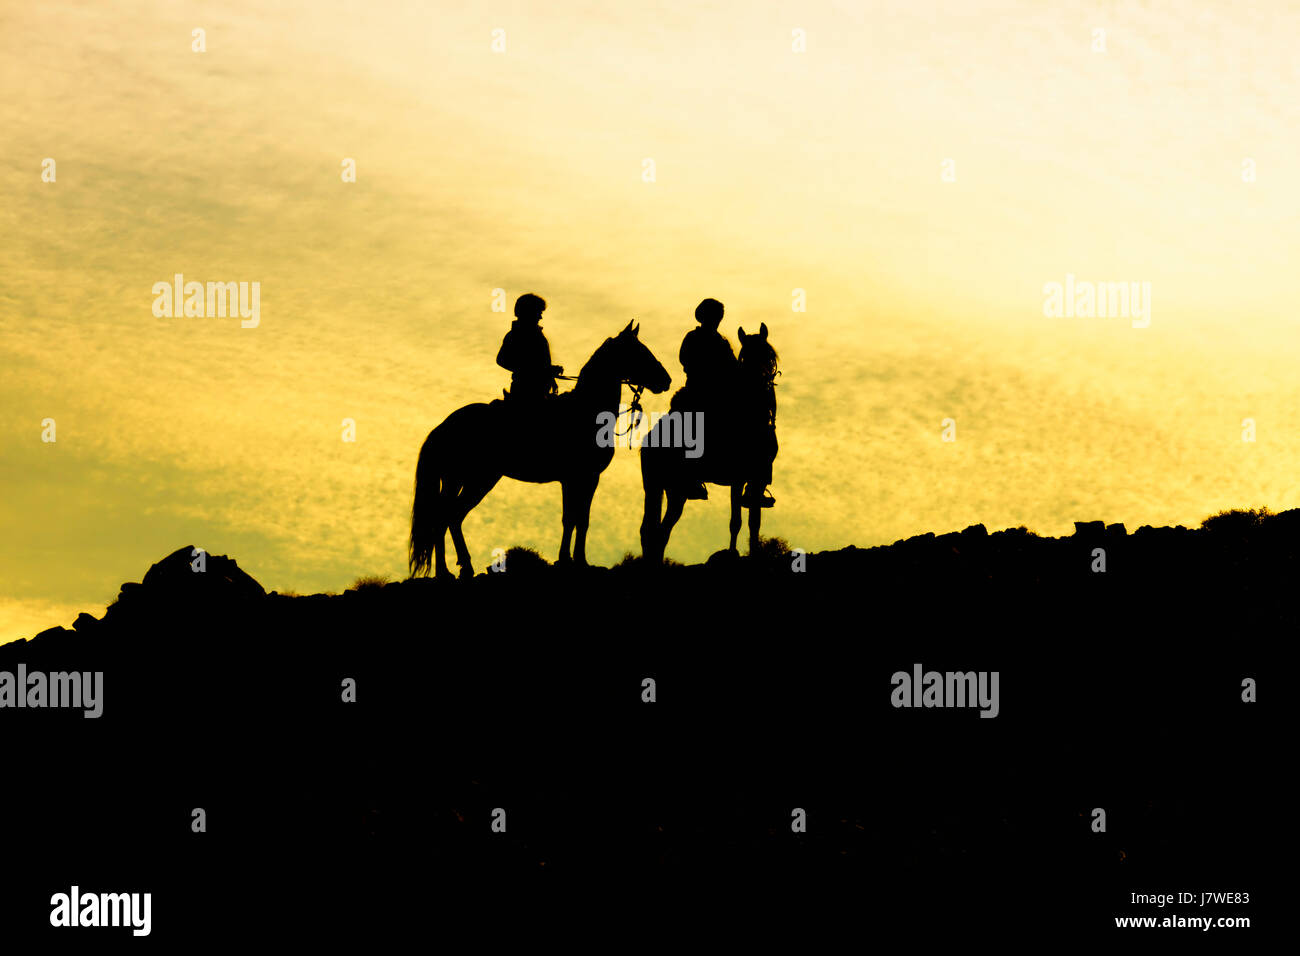 ride horse animal wild silhouette rider equestrian nature humans human beings Stock Photo